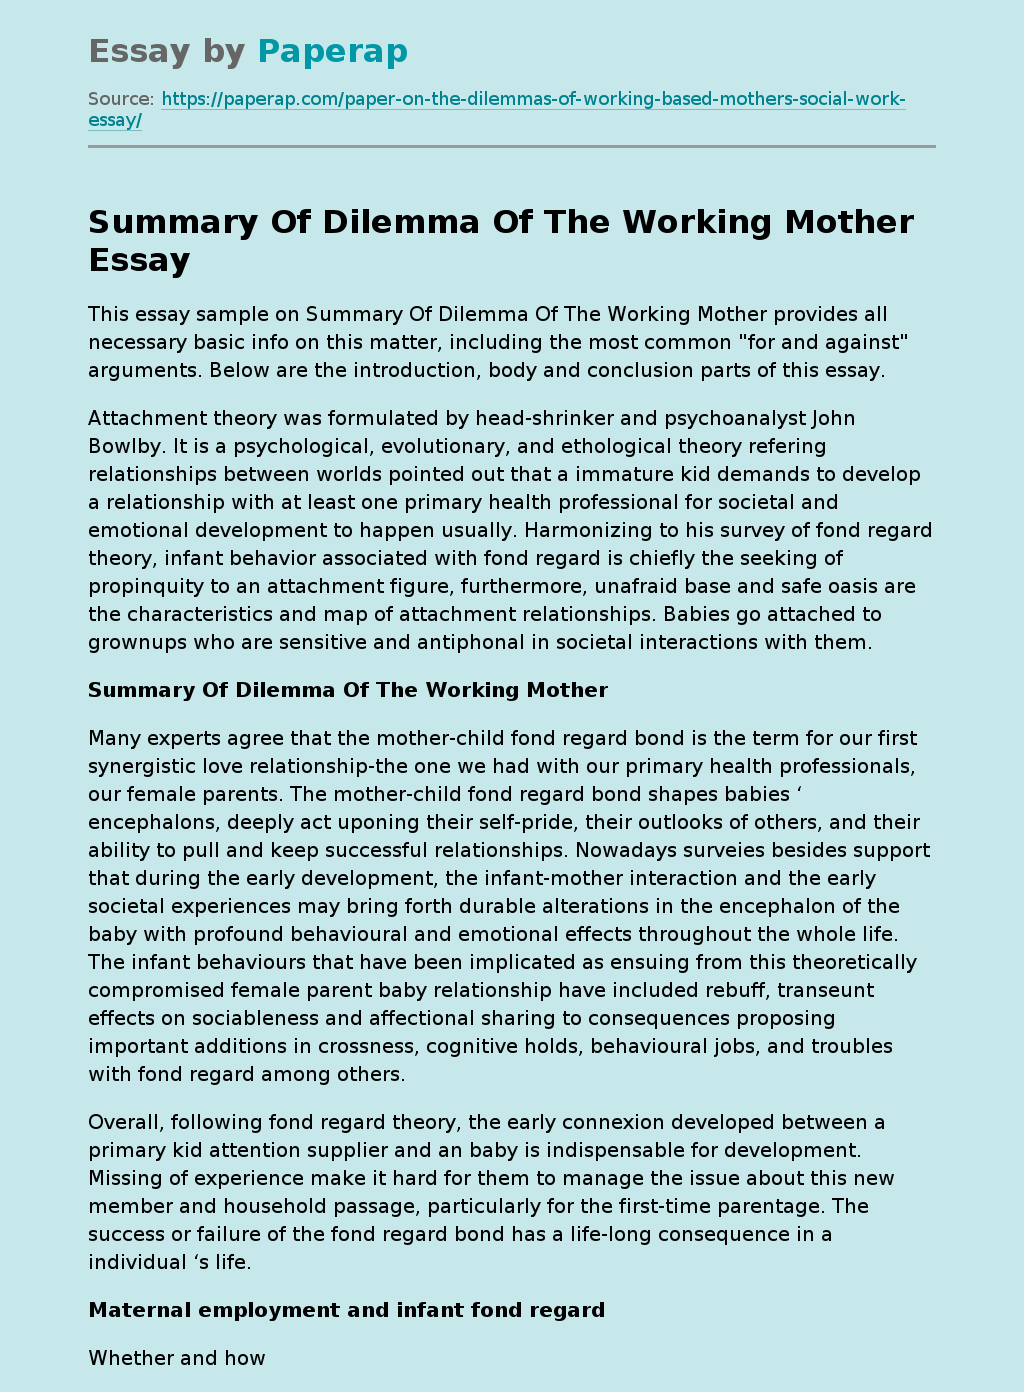 Summary Of Dilemma Of The Working Mother